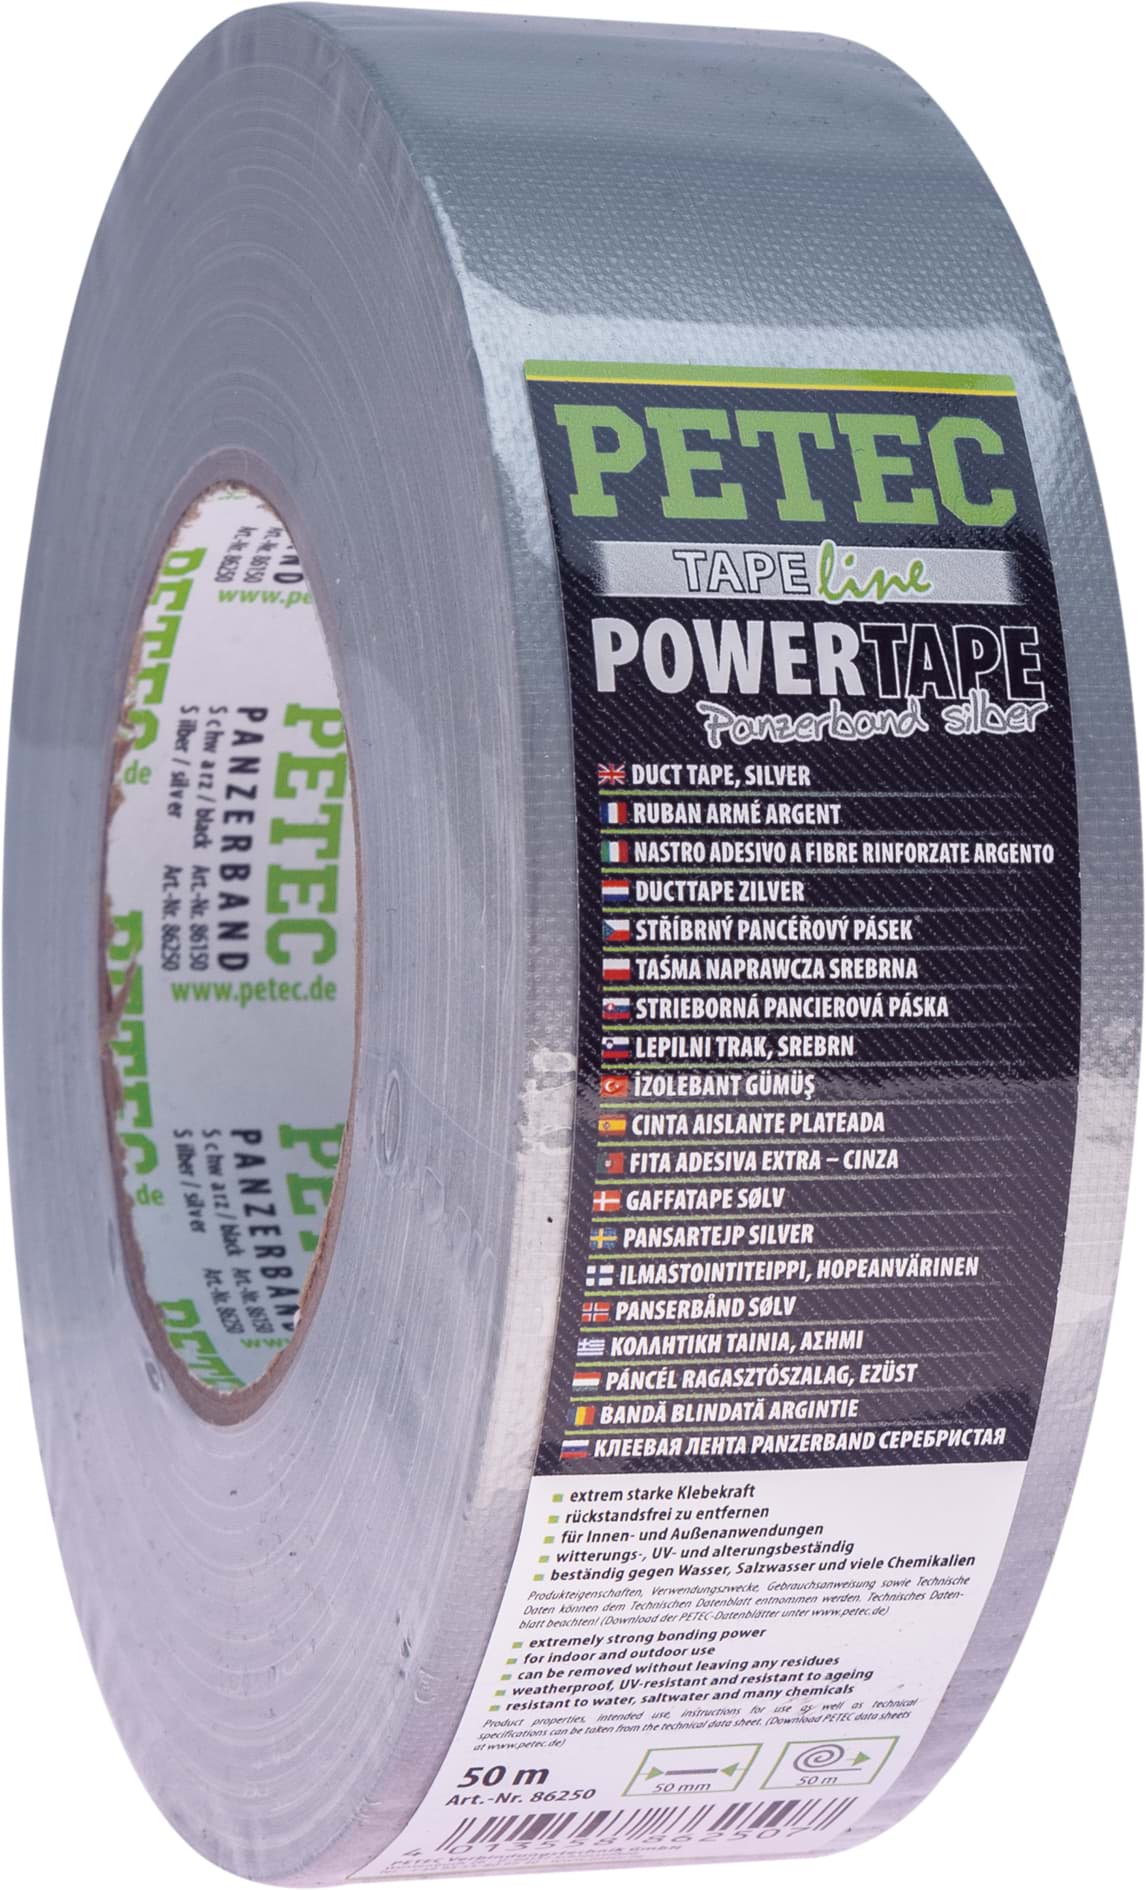 Picture of Petec Power Tape Panzerband silber 50m